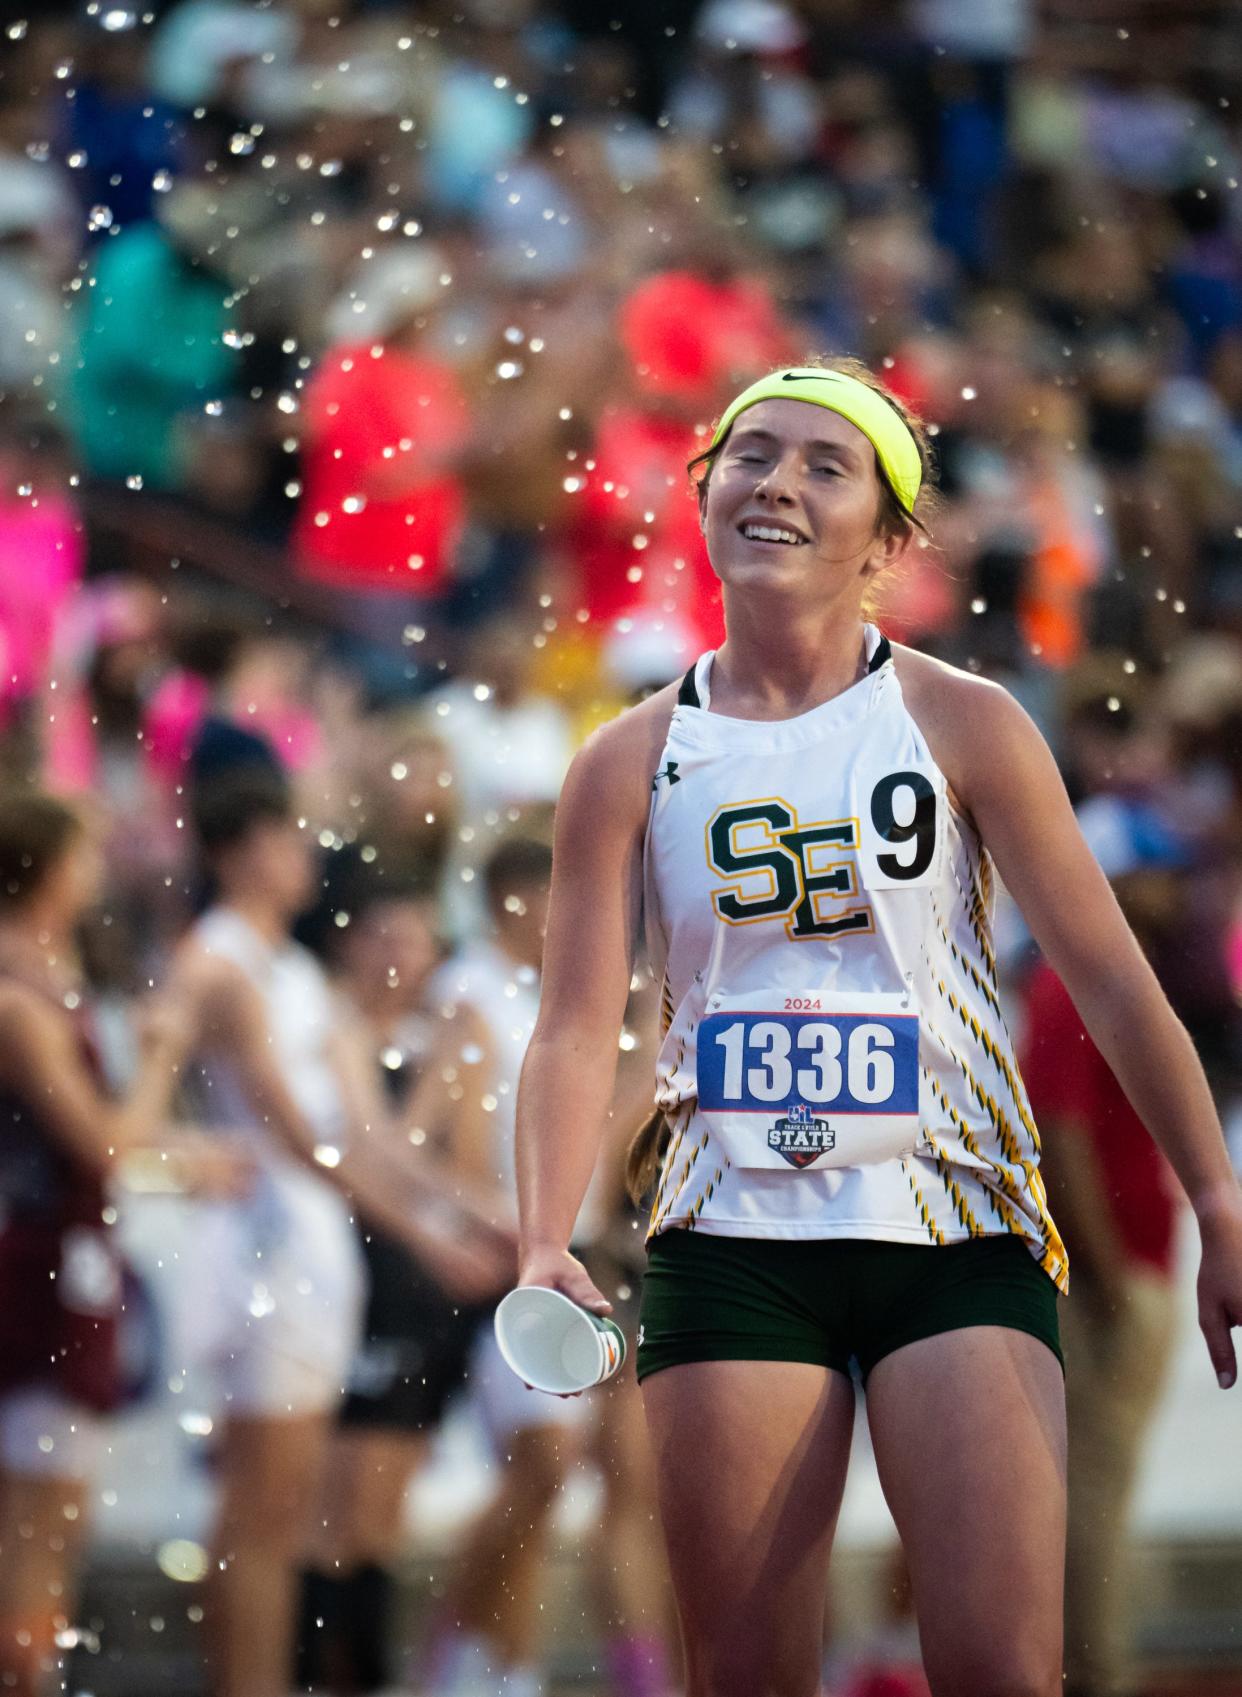 Springlake-Earth's Taytum Goodman celebrates after winning the 1,600 meters at the Class 1A UIL state track and field meet Saturday at Mike A. Myers Stadium in Austin.